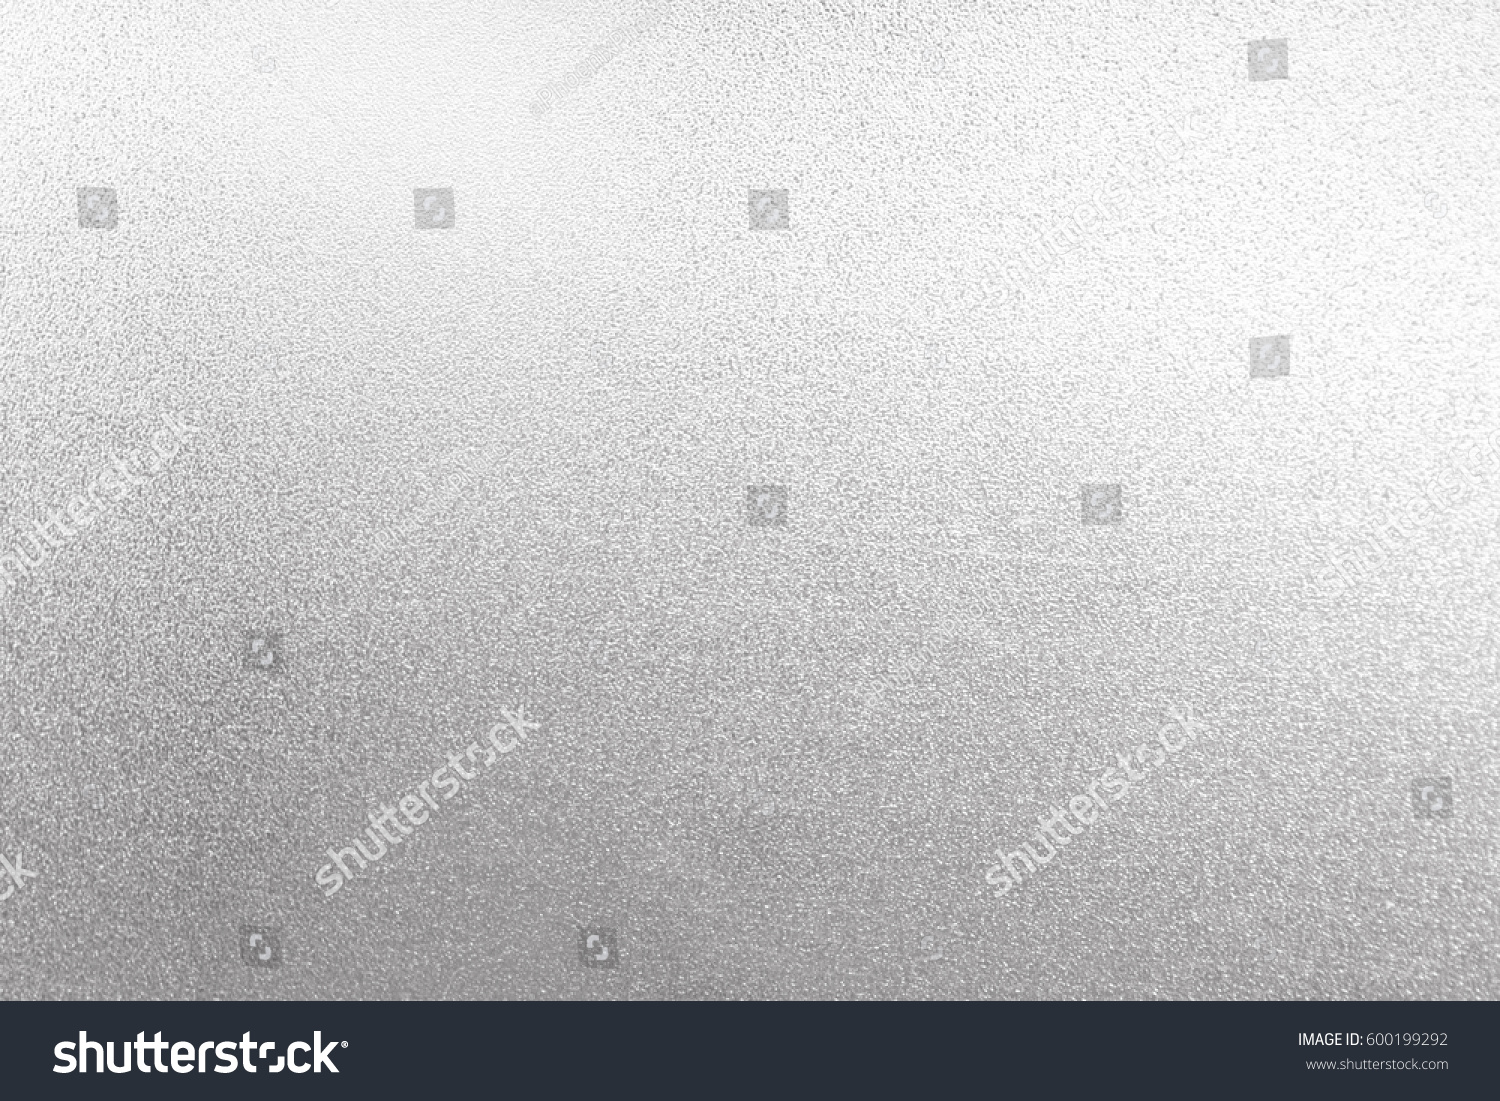 Silver texture background. Silver foil #600199292